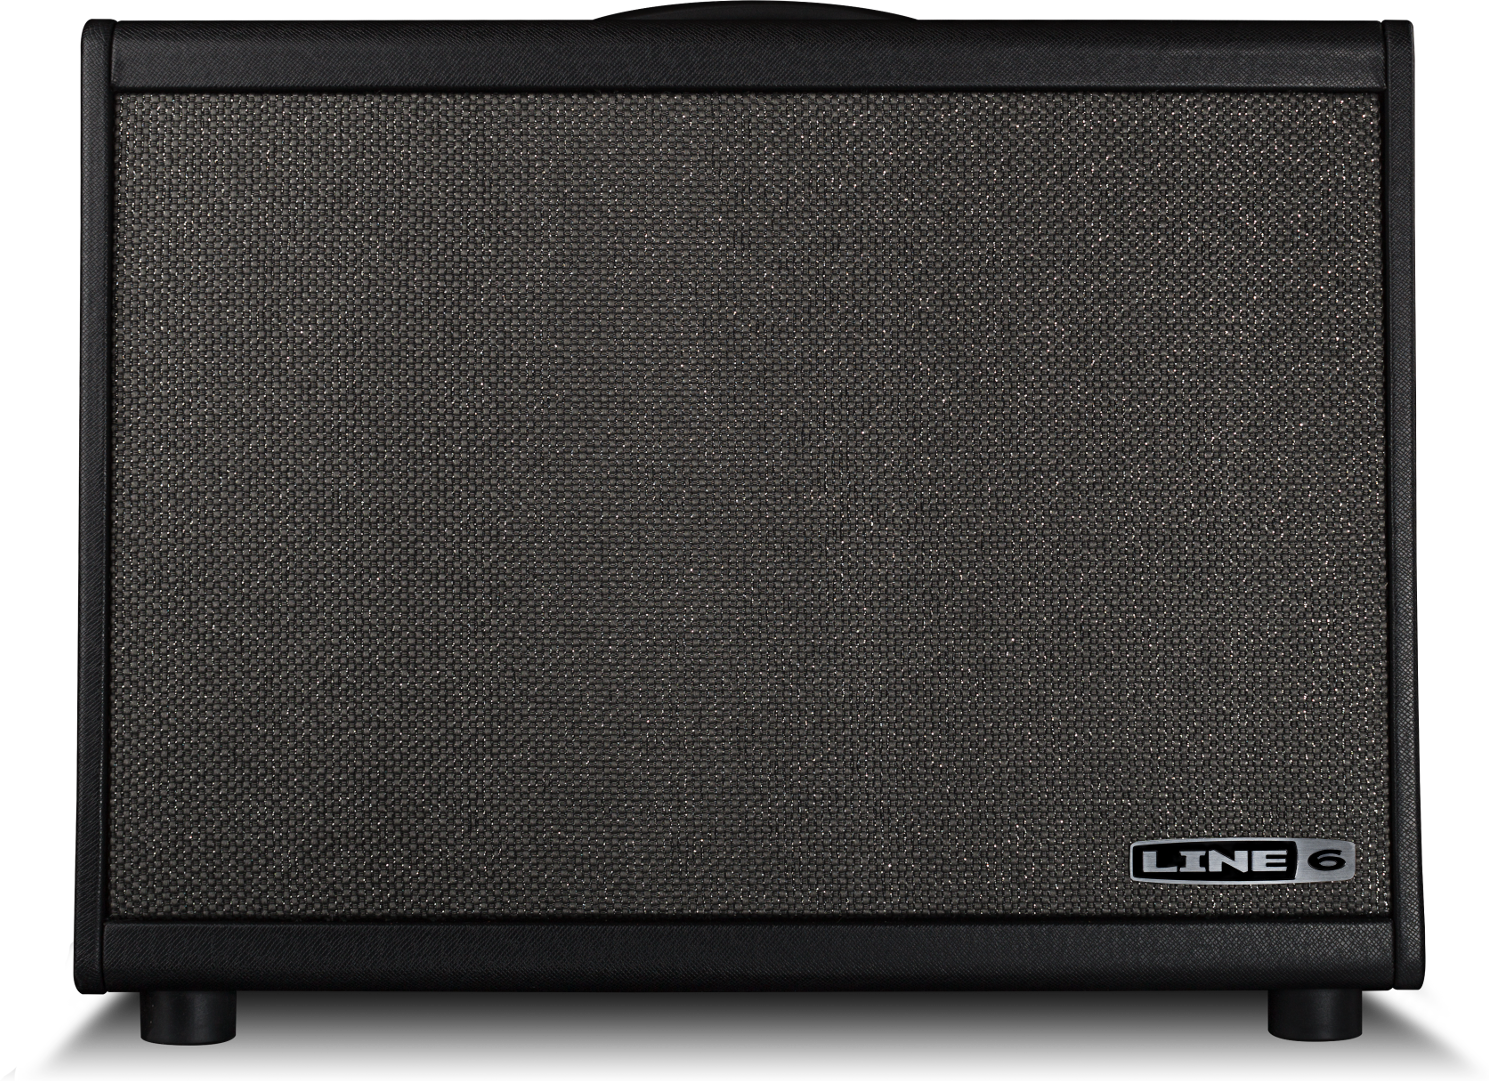 Line 6 Powercab 112 - Electric guitar amp cabinet - Main picture